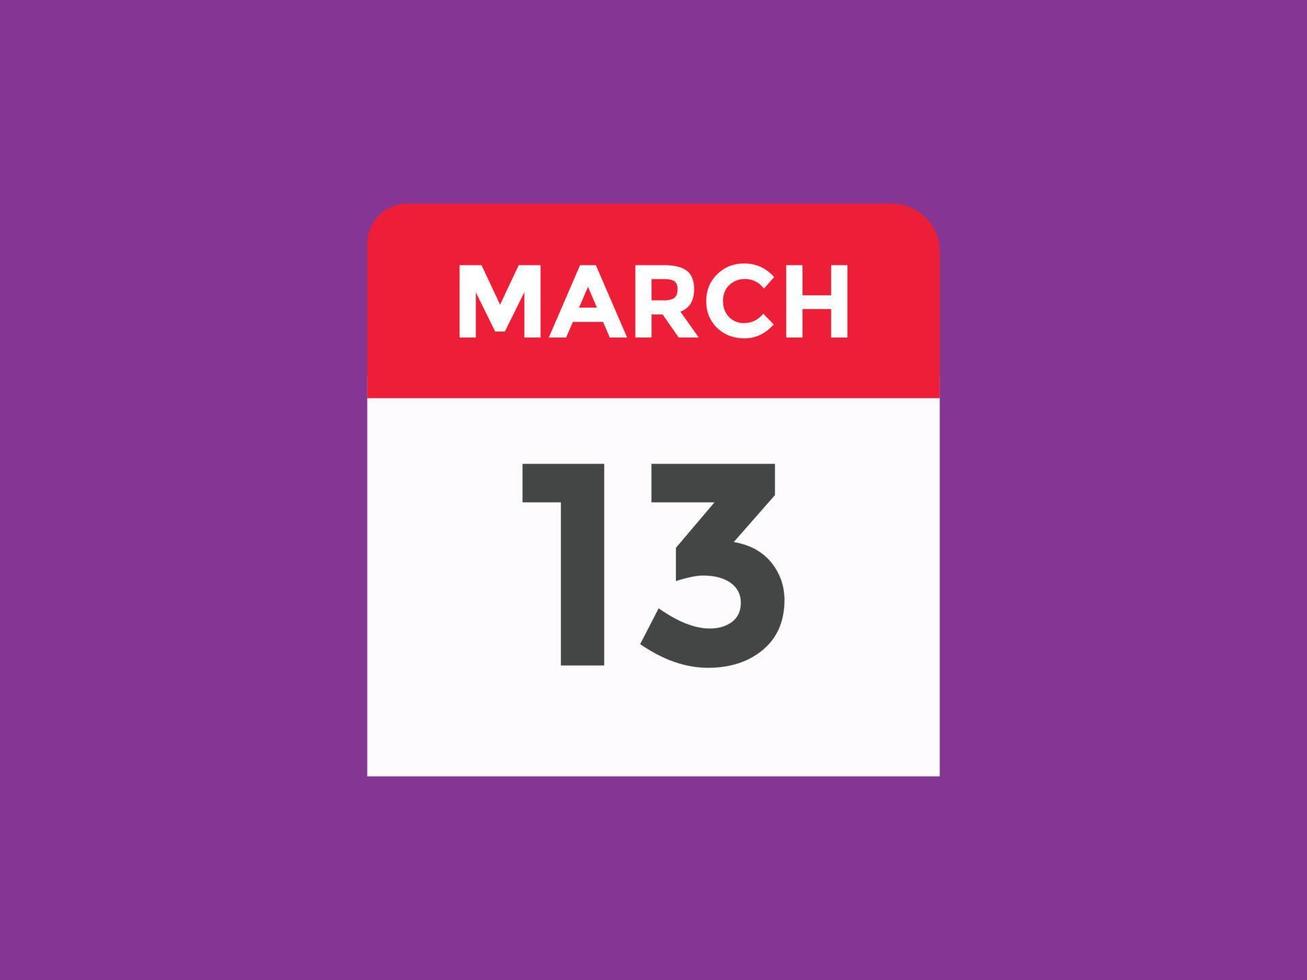 march 13 calendar reminder. 13th march daily calendar icon template. Calendar 13th march icon Design template. Vector illustration